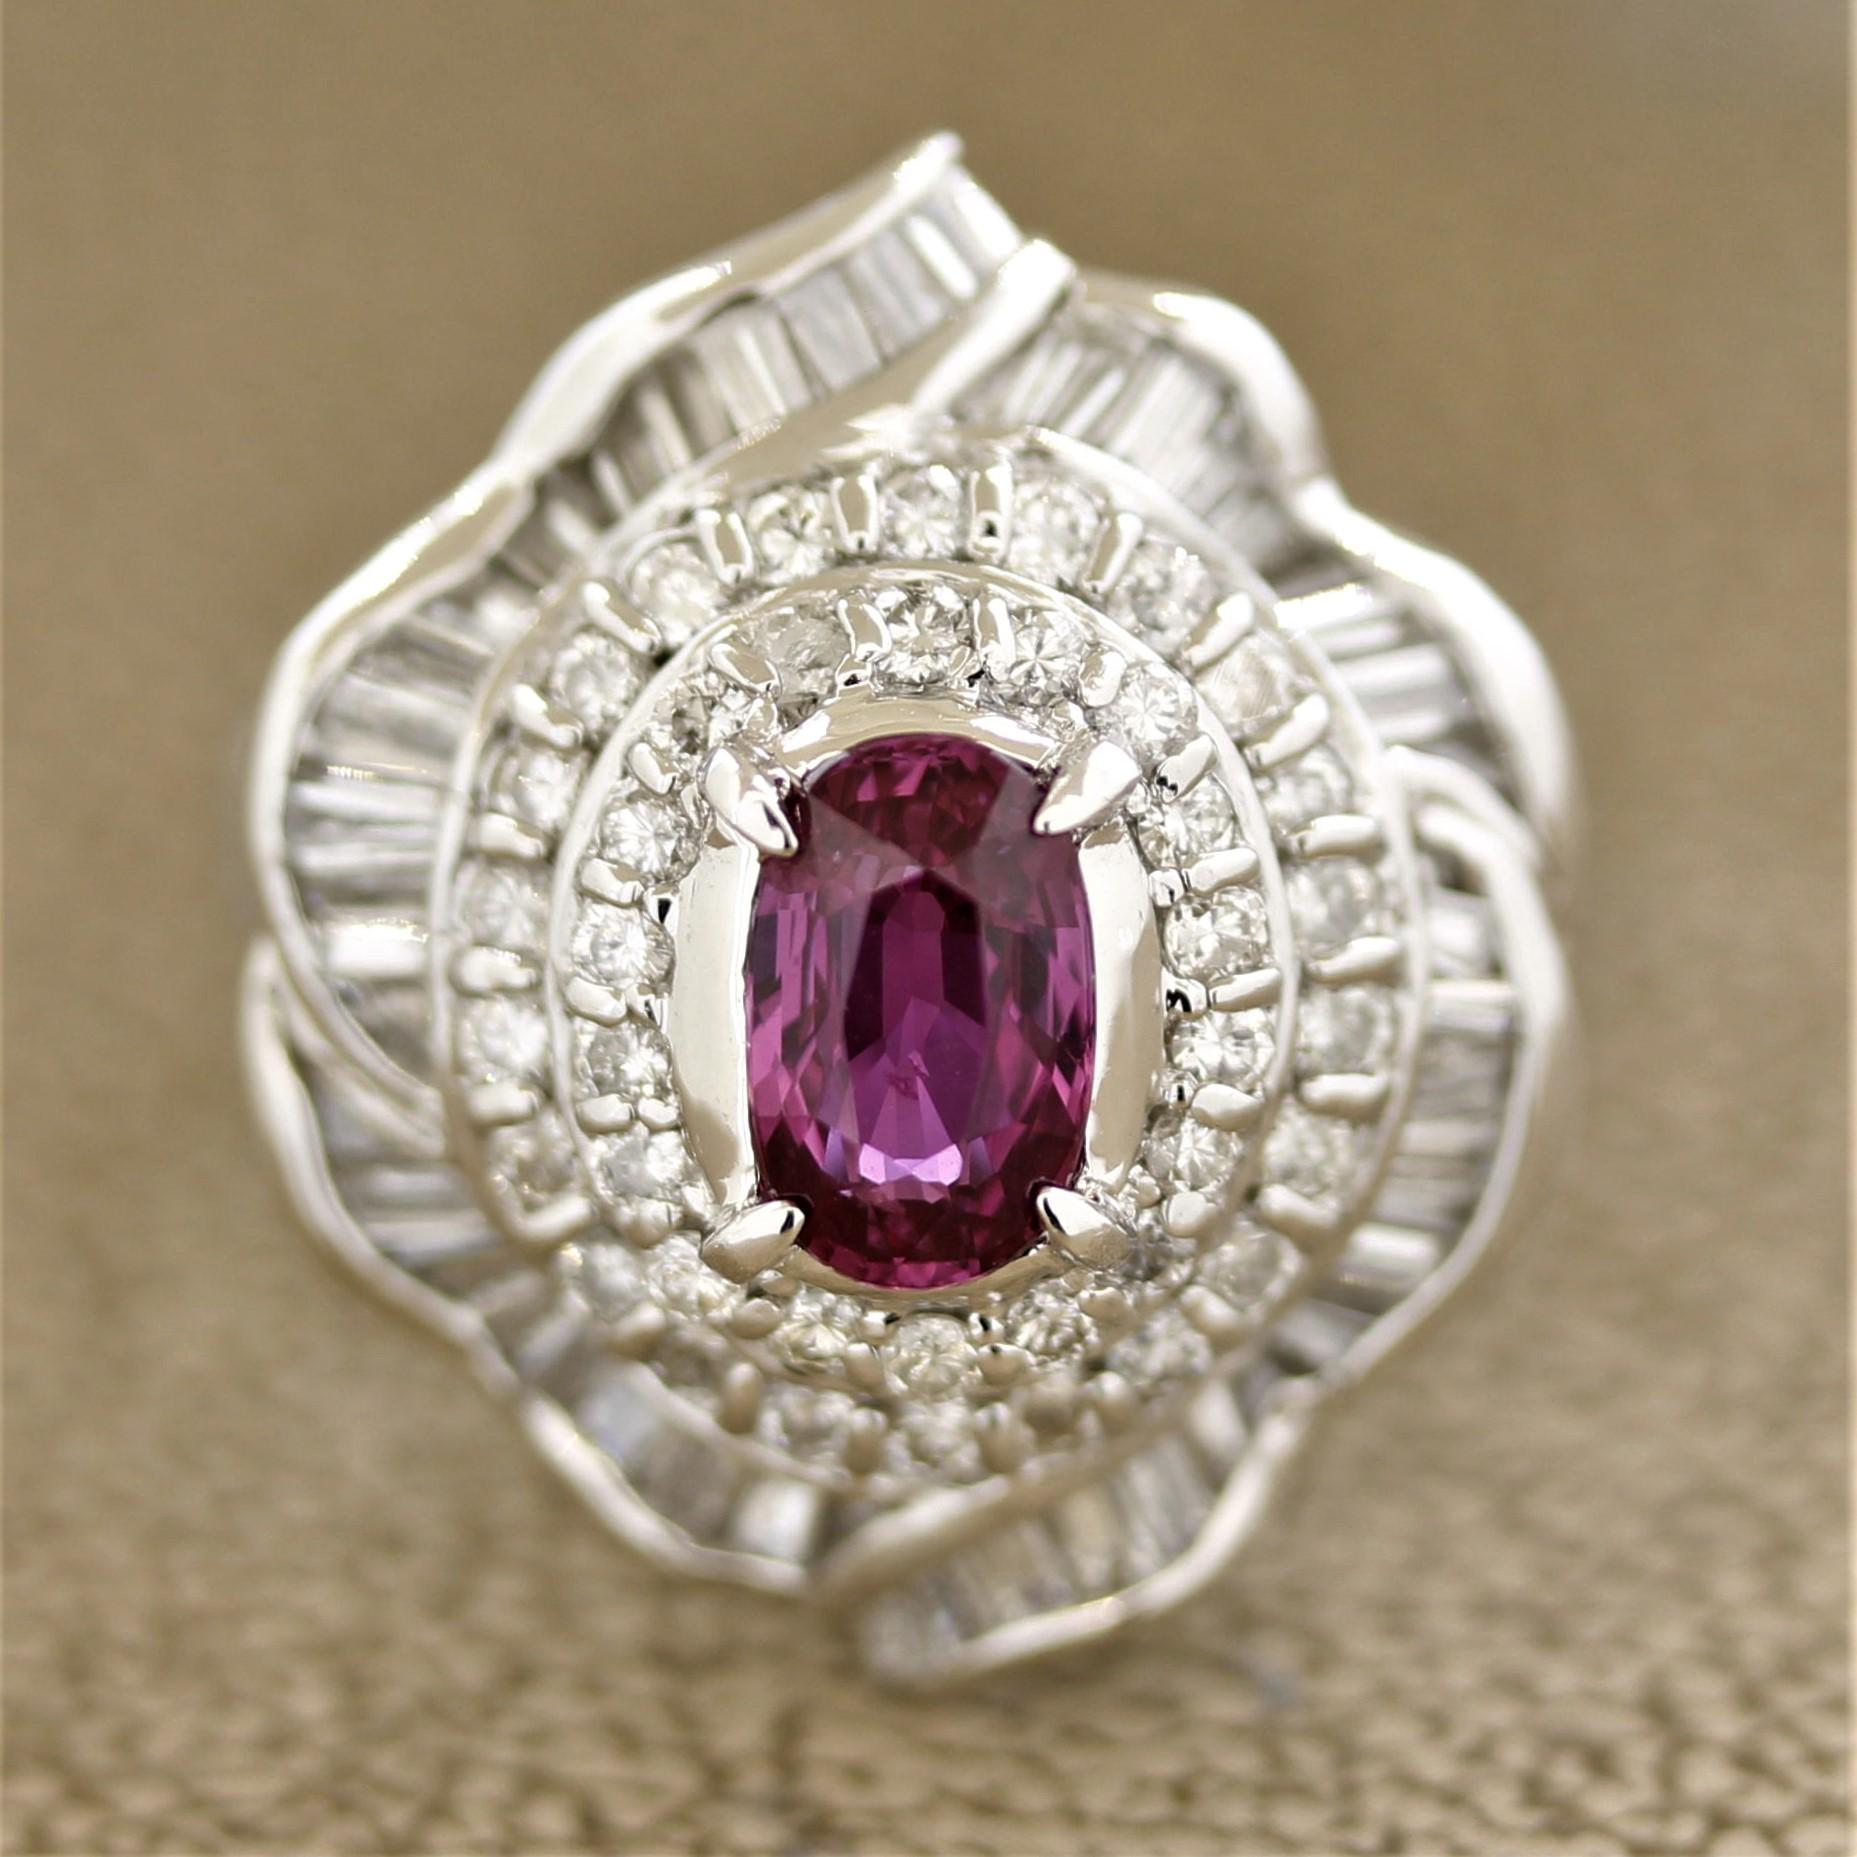 A platinum ring featuring a superb gem quality pink sapphire. It has a bright and vivid reddish-pink color almost making the stone a ruby! It weighs 1.06 carats and is cut as a long oval shape and is free of any visible inclusions. It is accented by